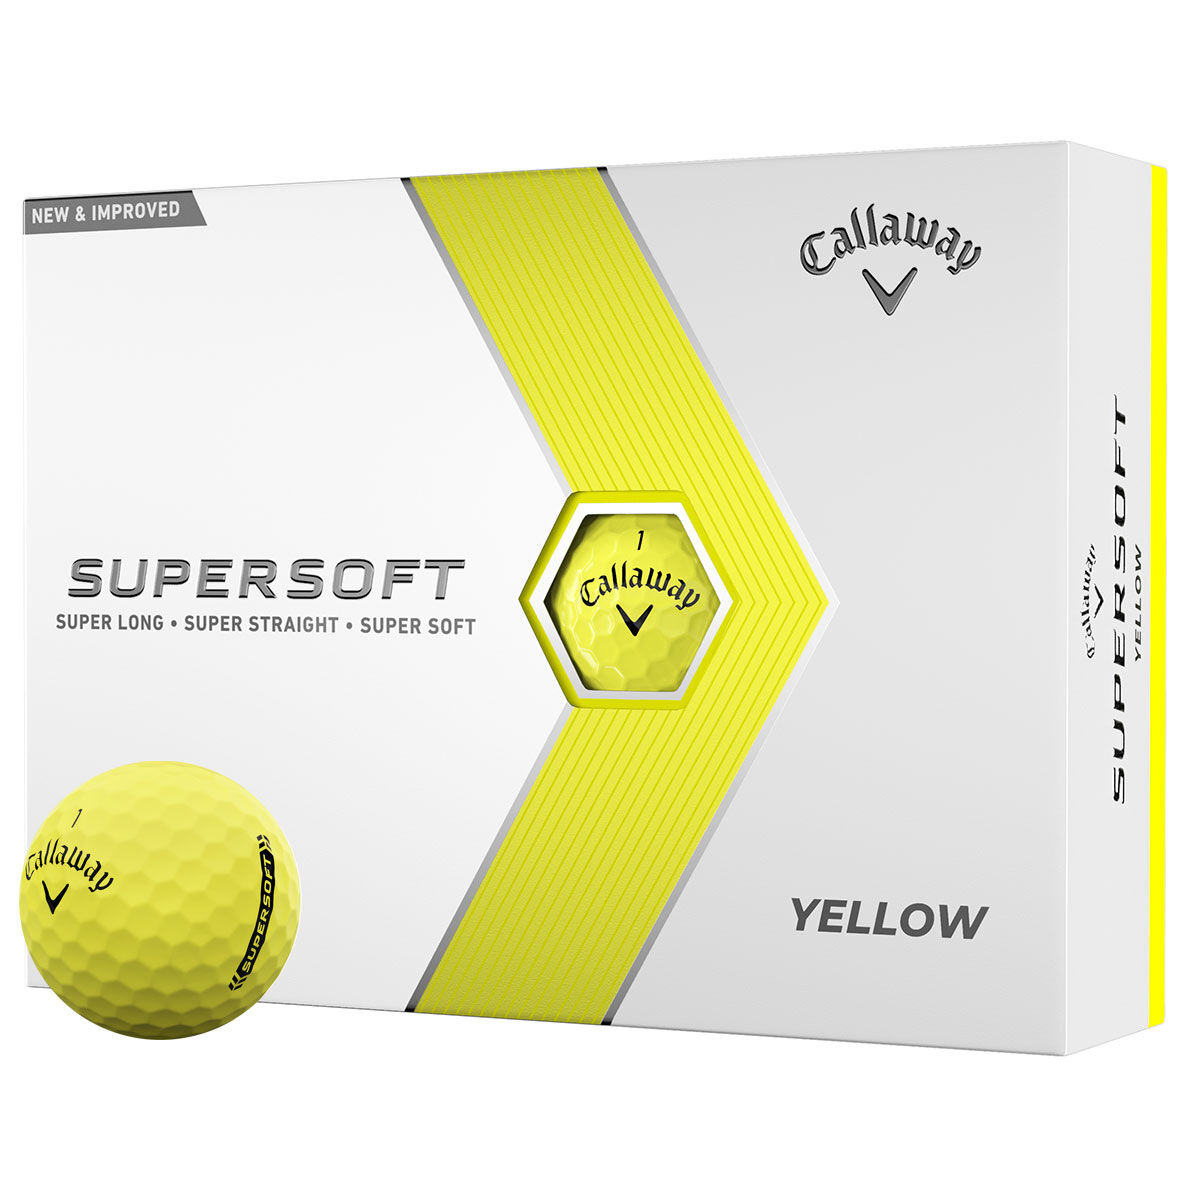 Callaway Golf Yellow Supersoft 12 Golf Ball Pack | American Golf, One Size